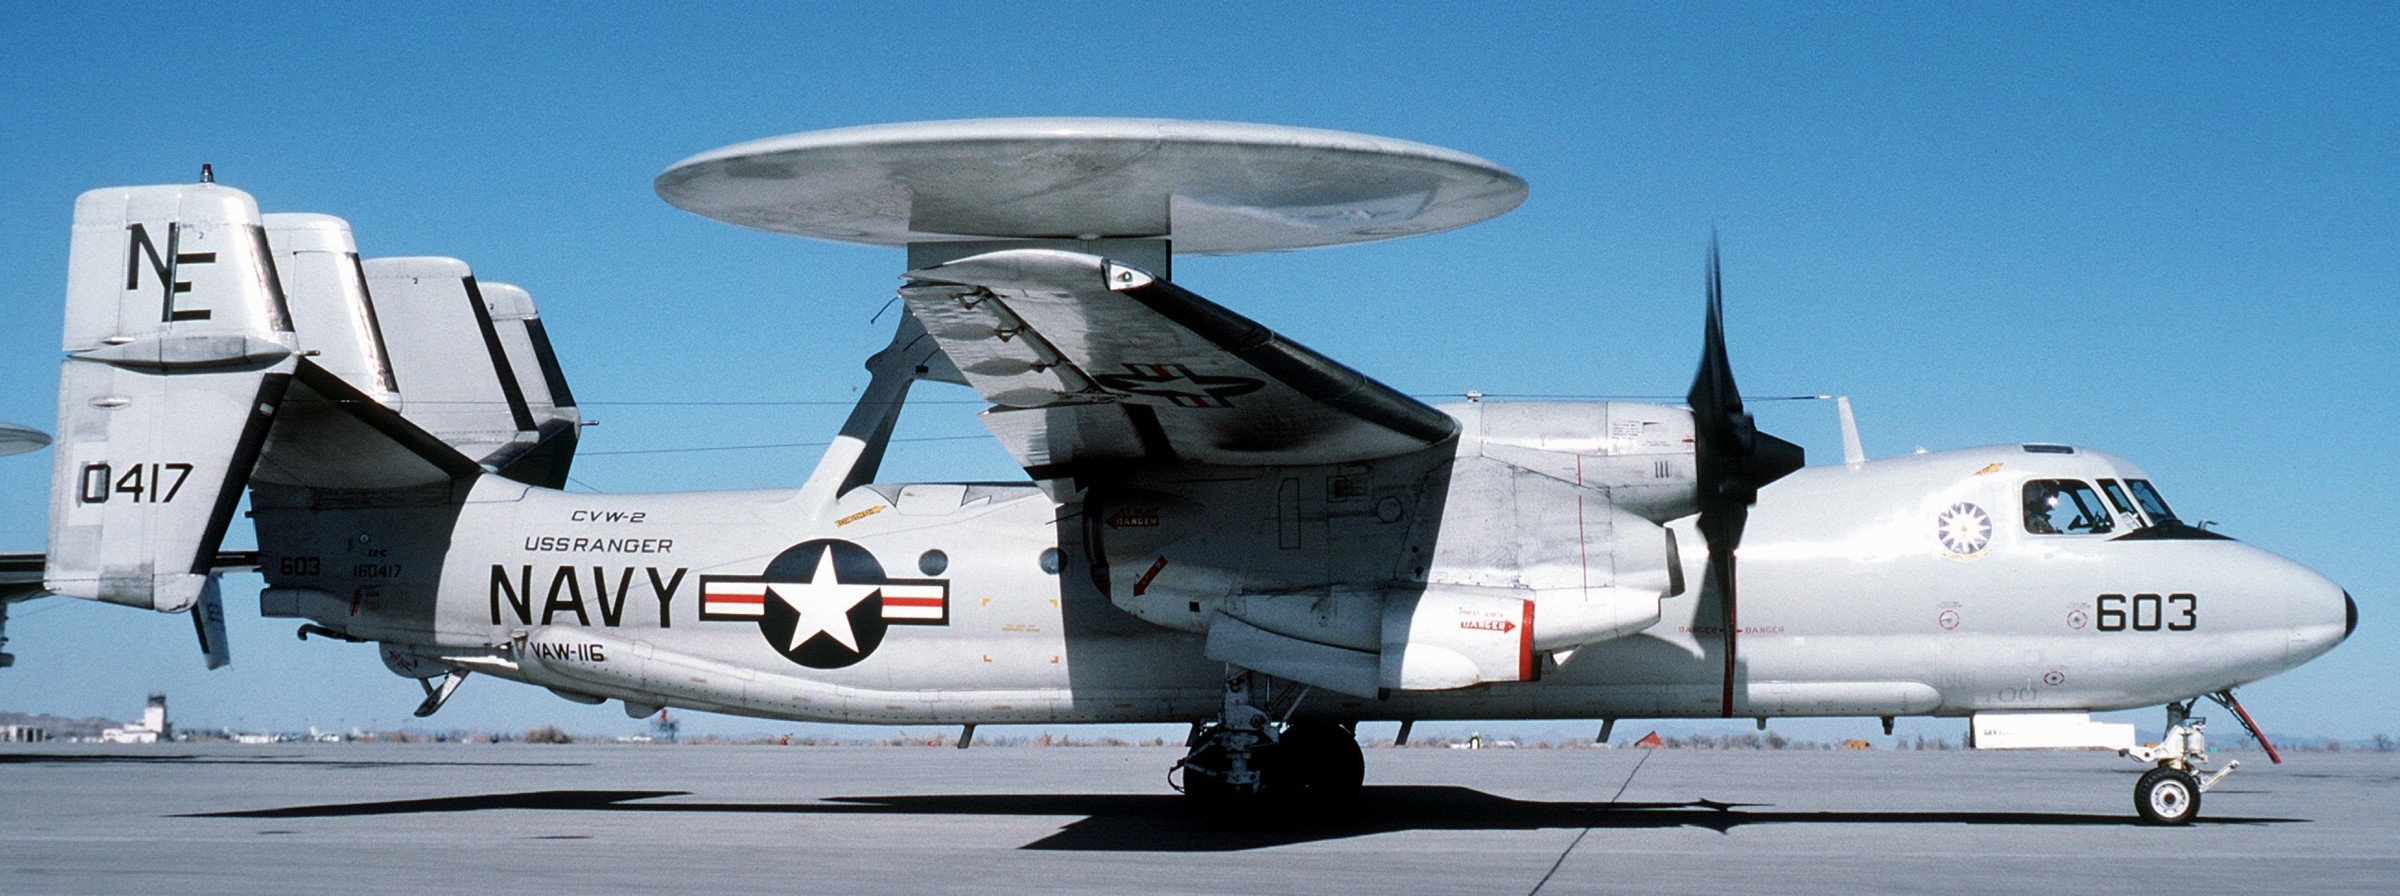 vaw-116 sun kings airborne command control squadron carrier early warning cvw-2 nas fallon nevada 119